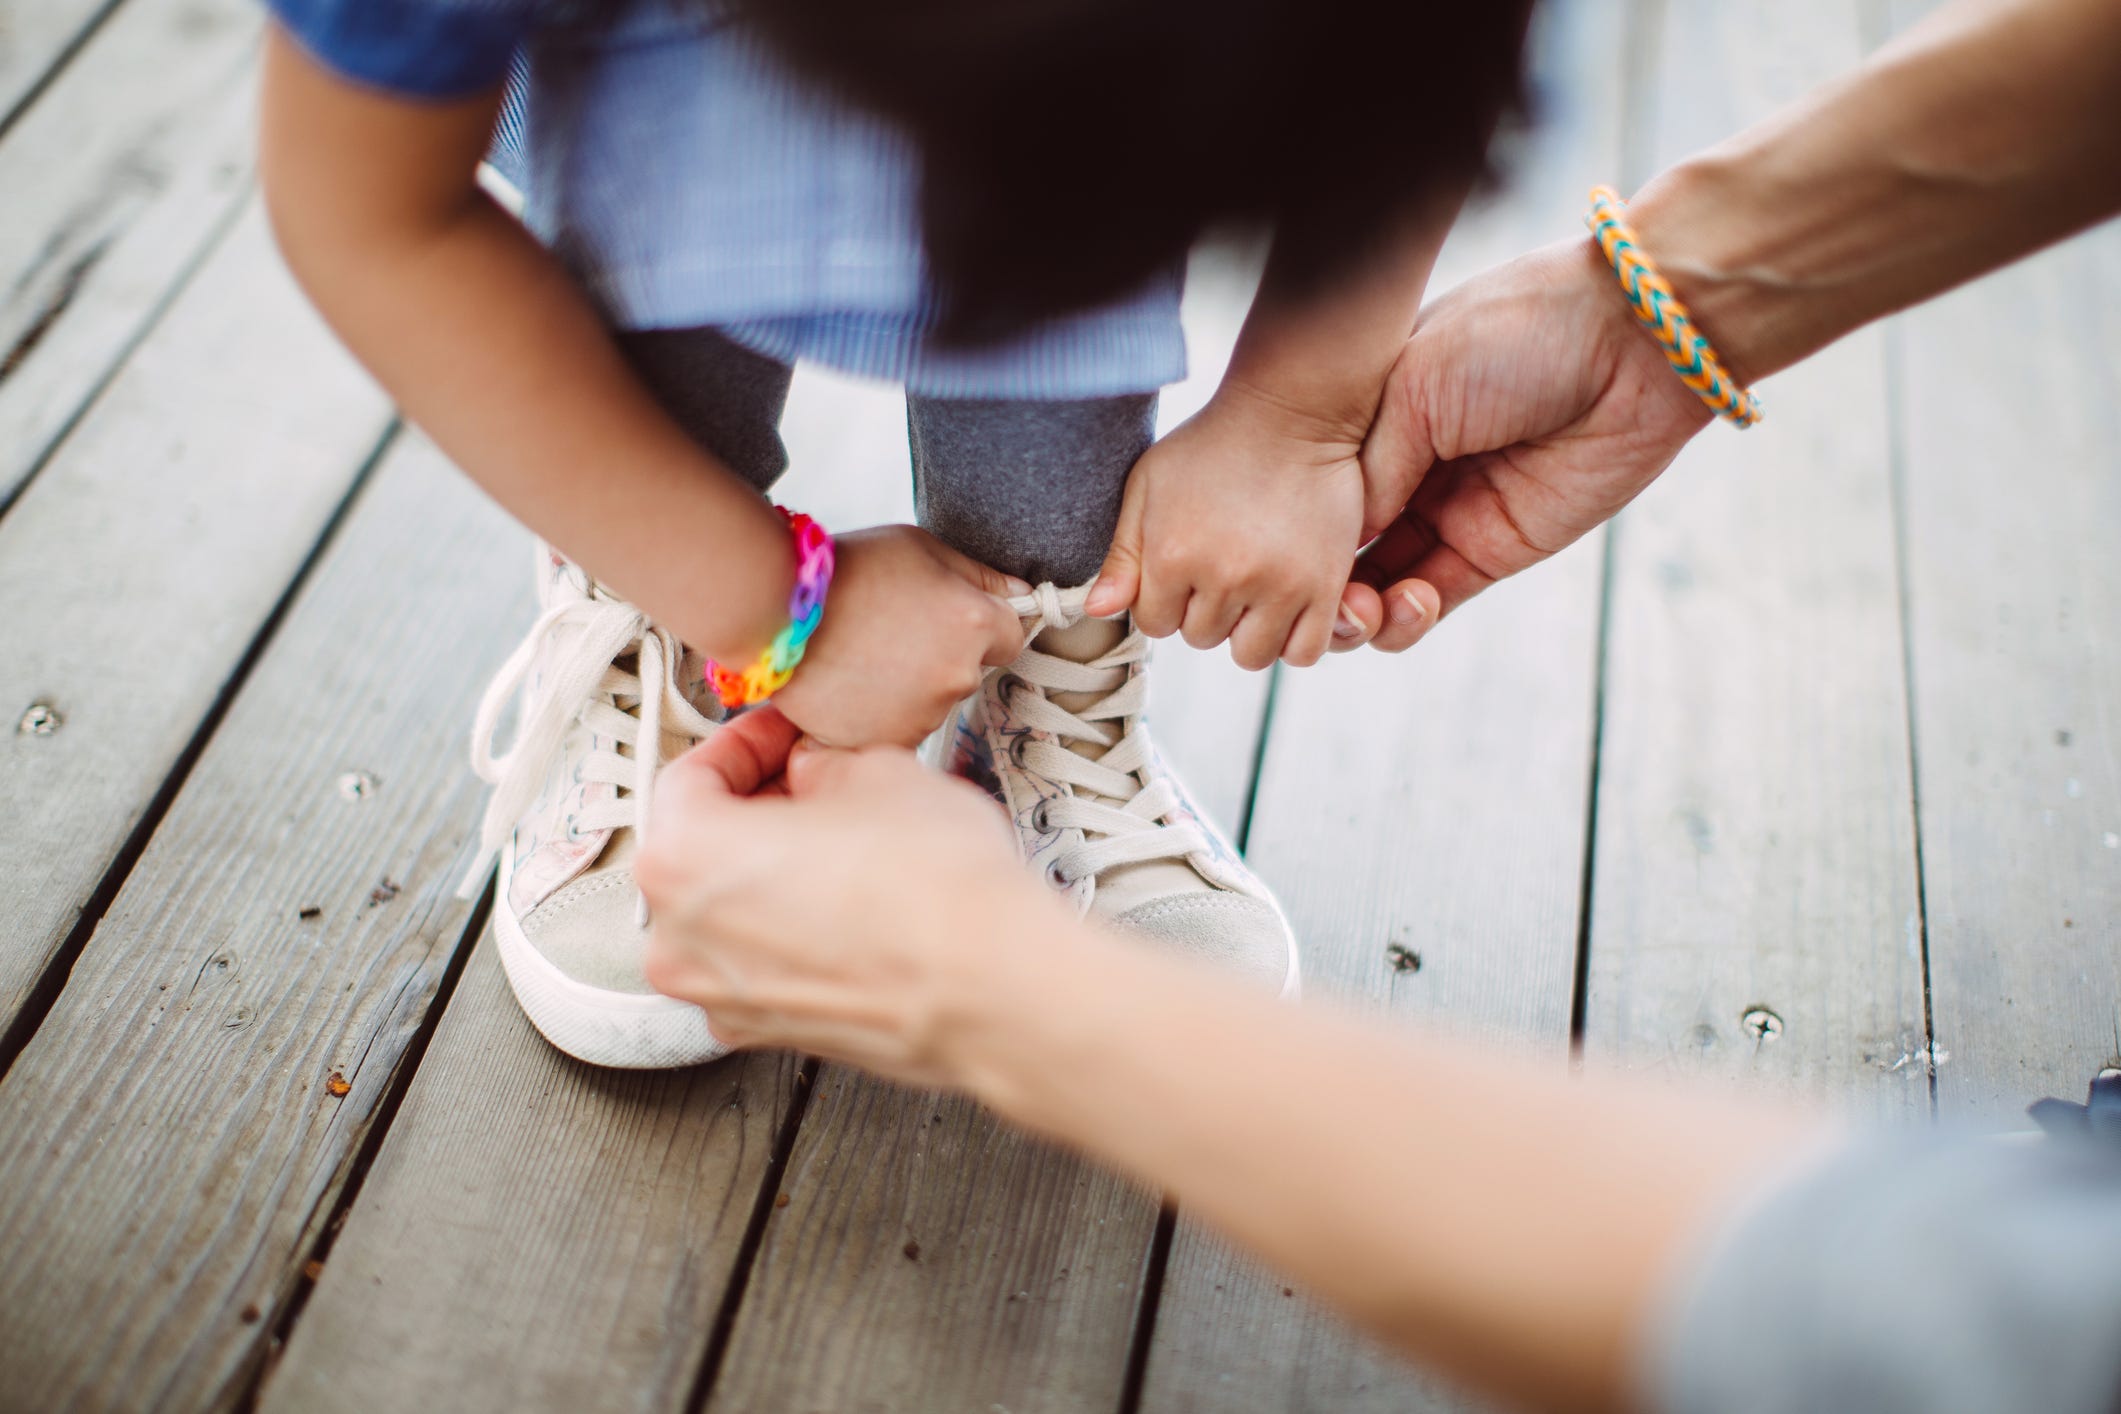 A parent helps a child tie their shoelaces.